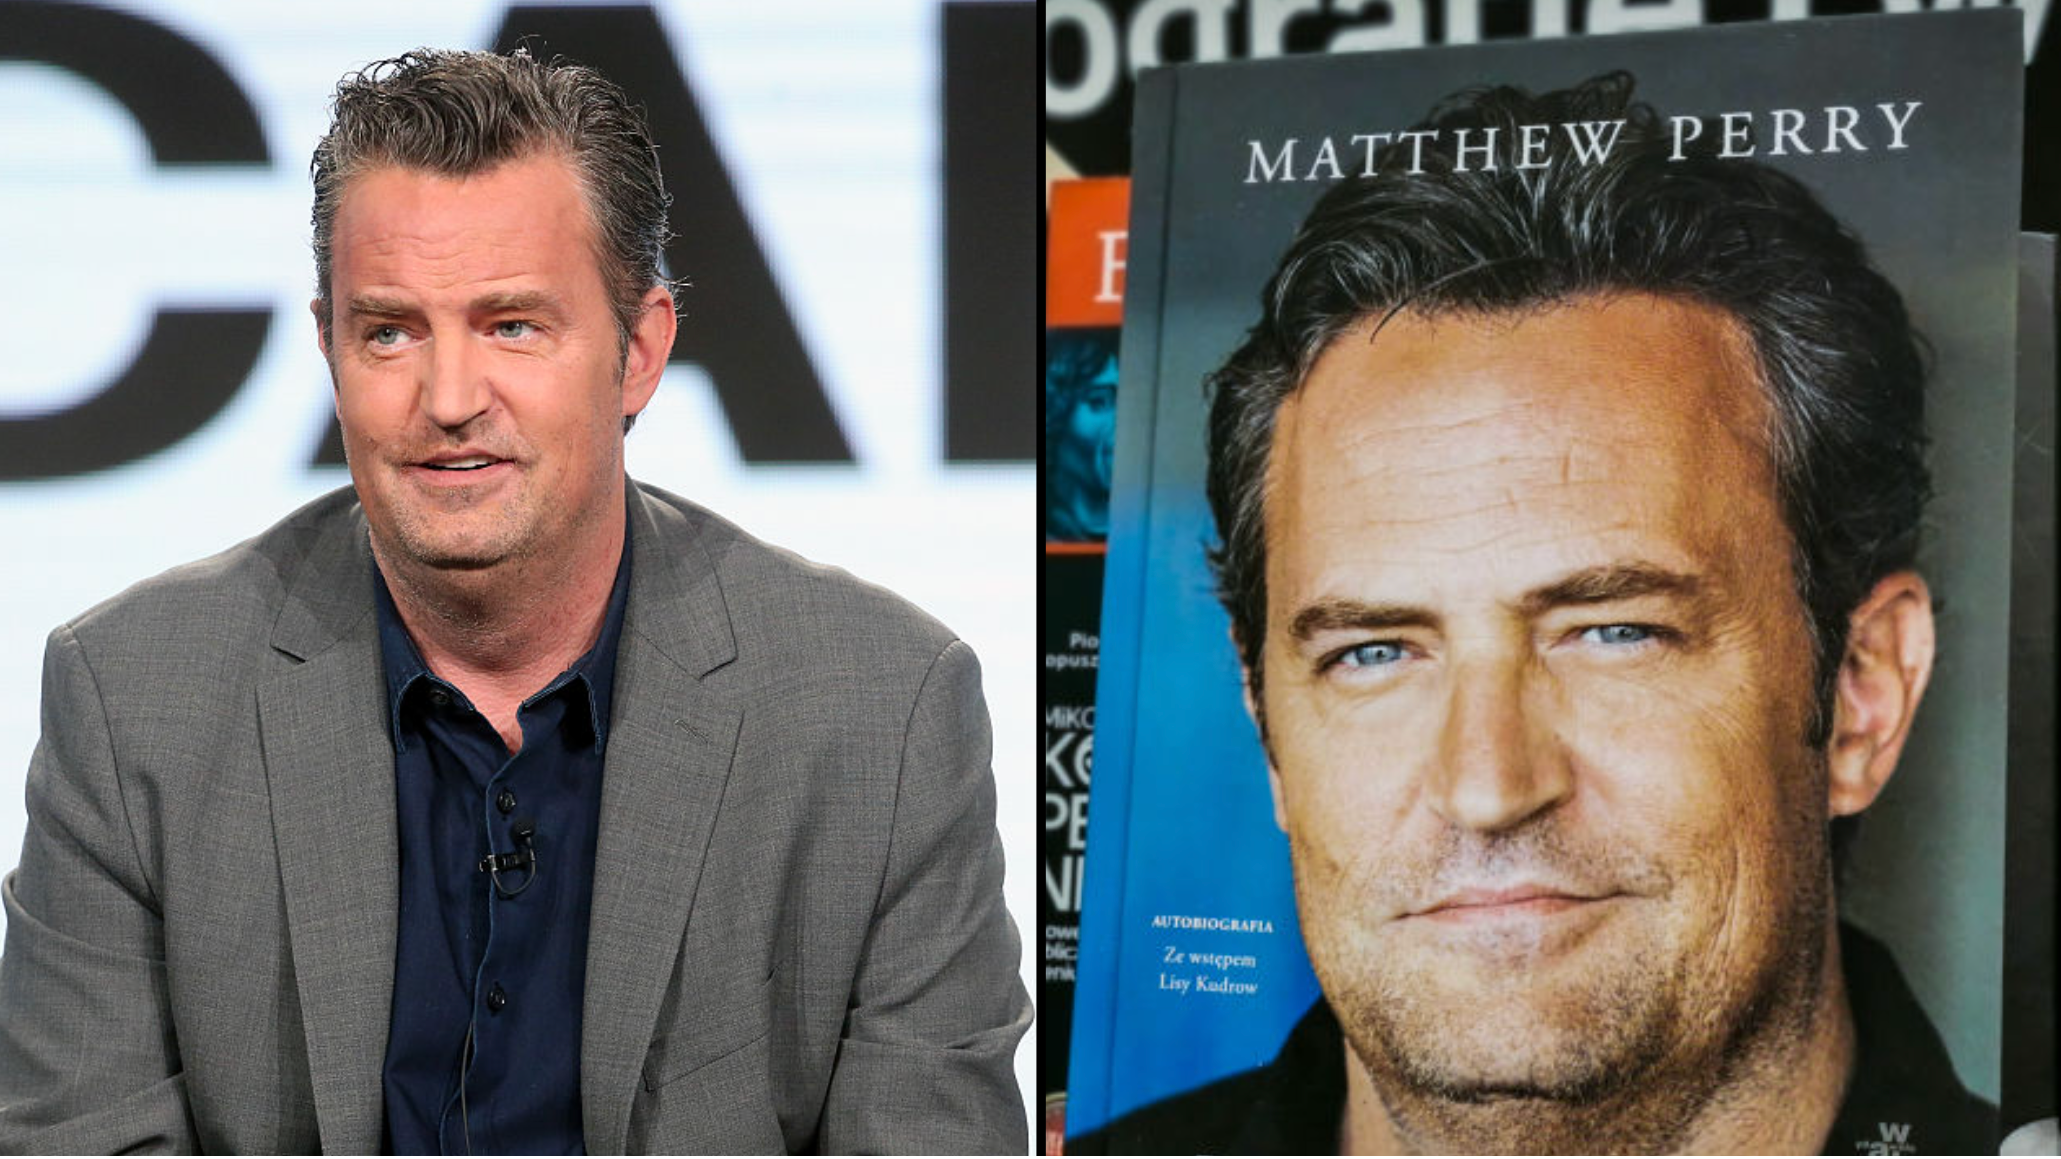 Matthew Perry's funeral song was quote he used to sign his books